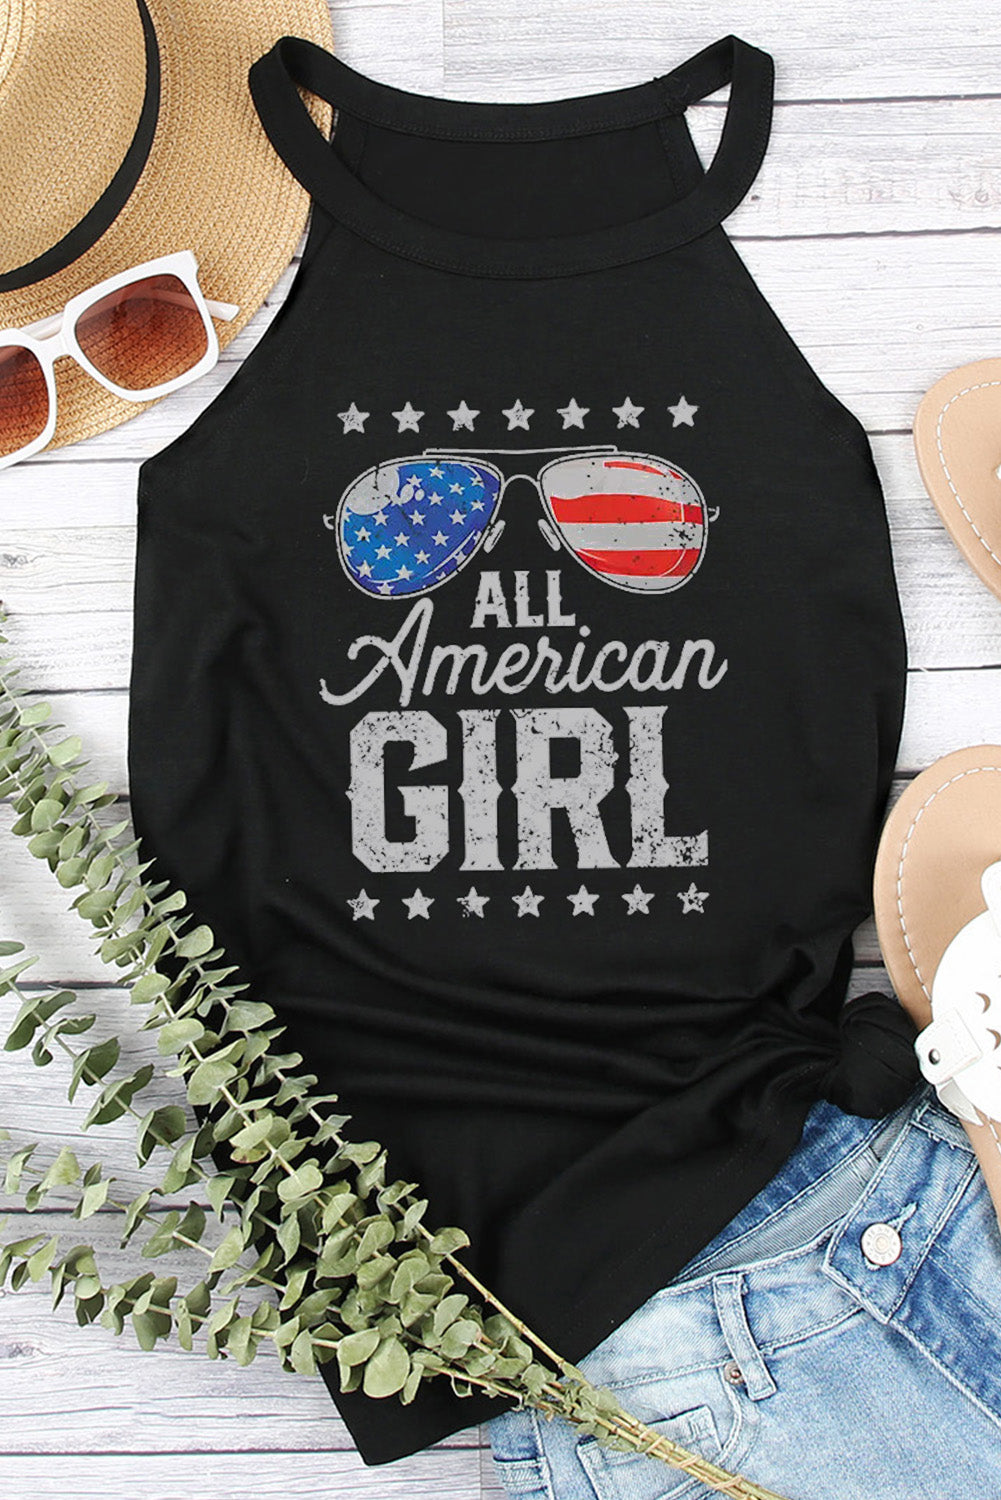 Full Size ALL AMERICAN GIRL Graphic Tank